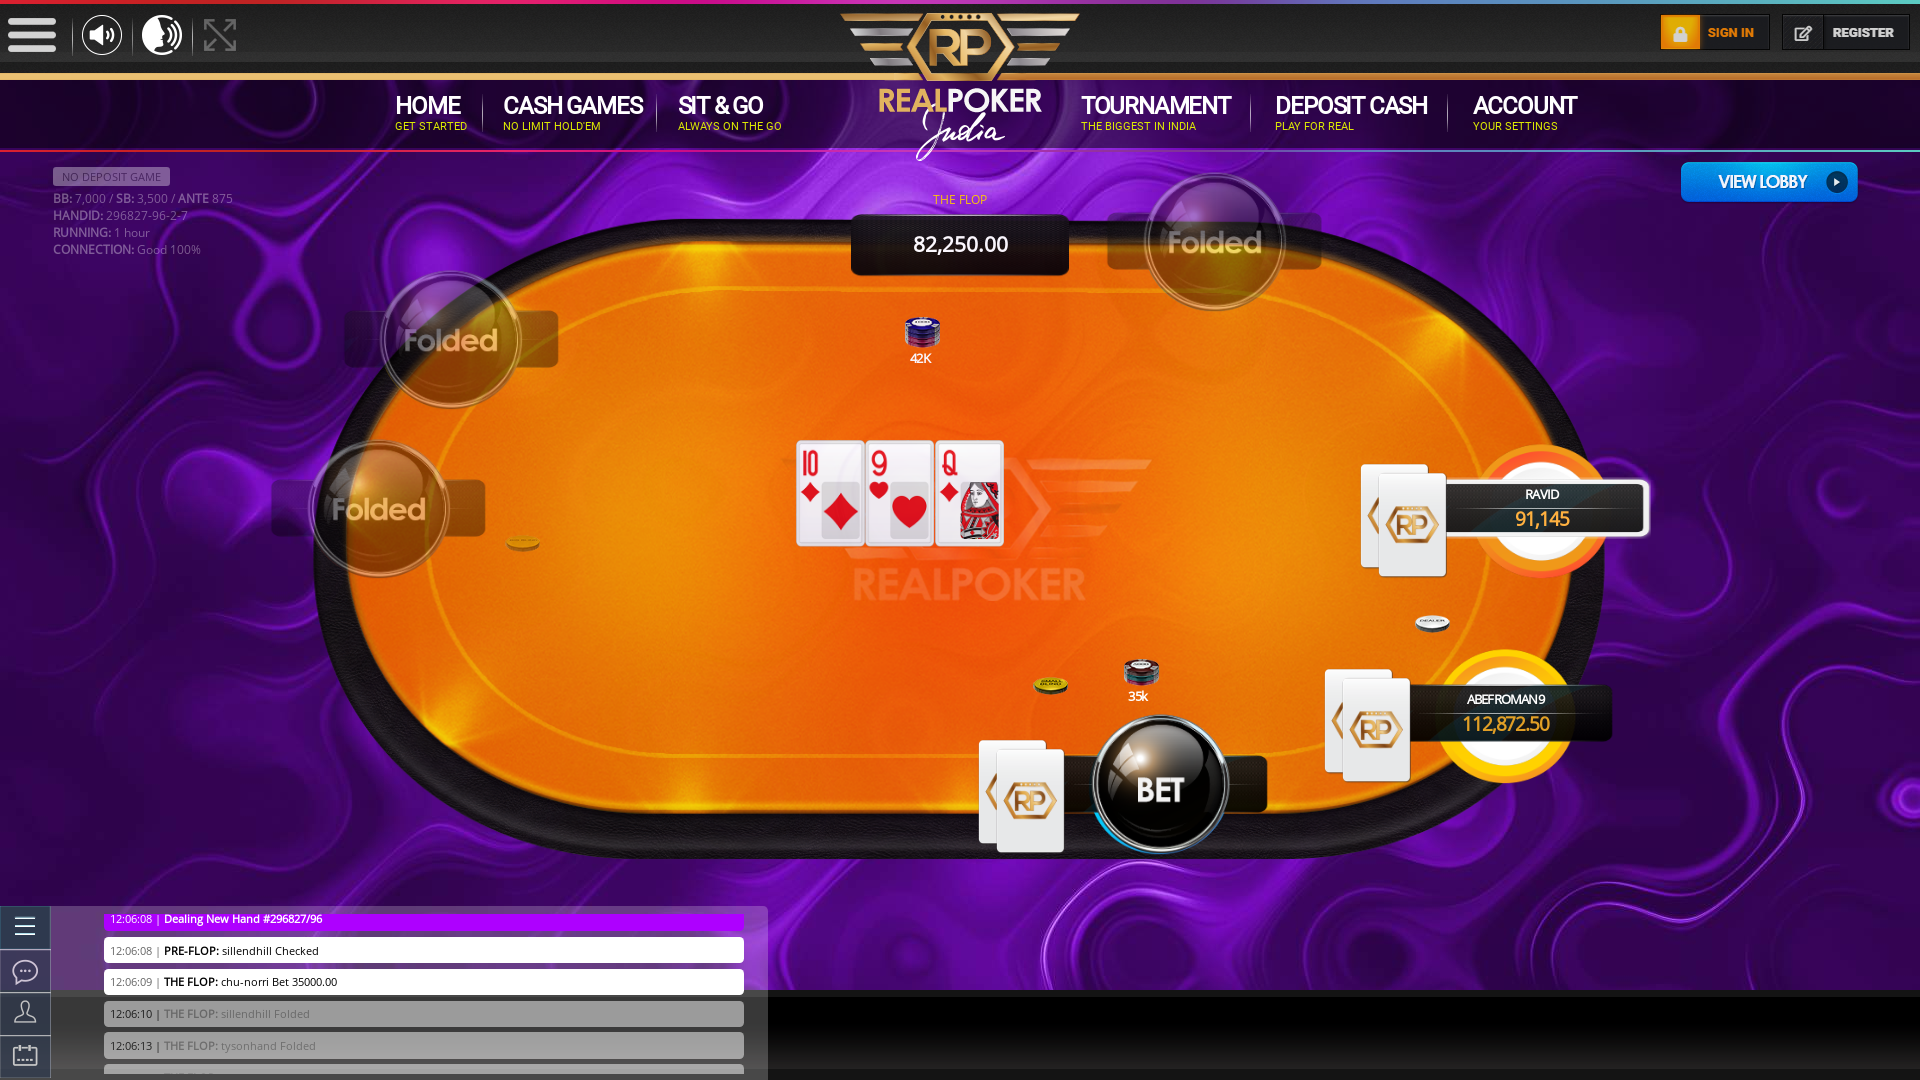 Indian online poker on a 10 player table in the 84th minute match up